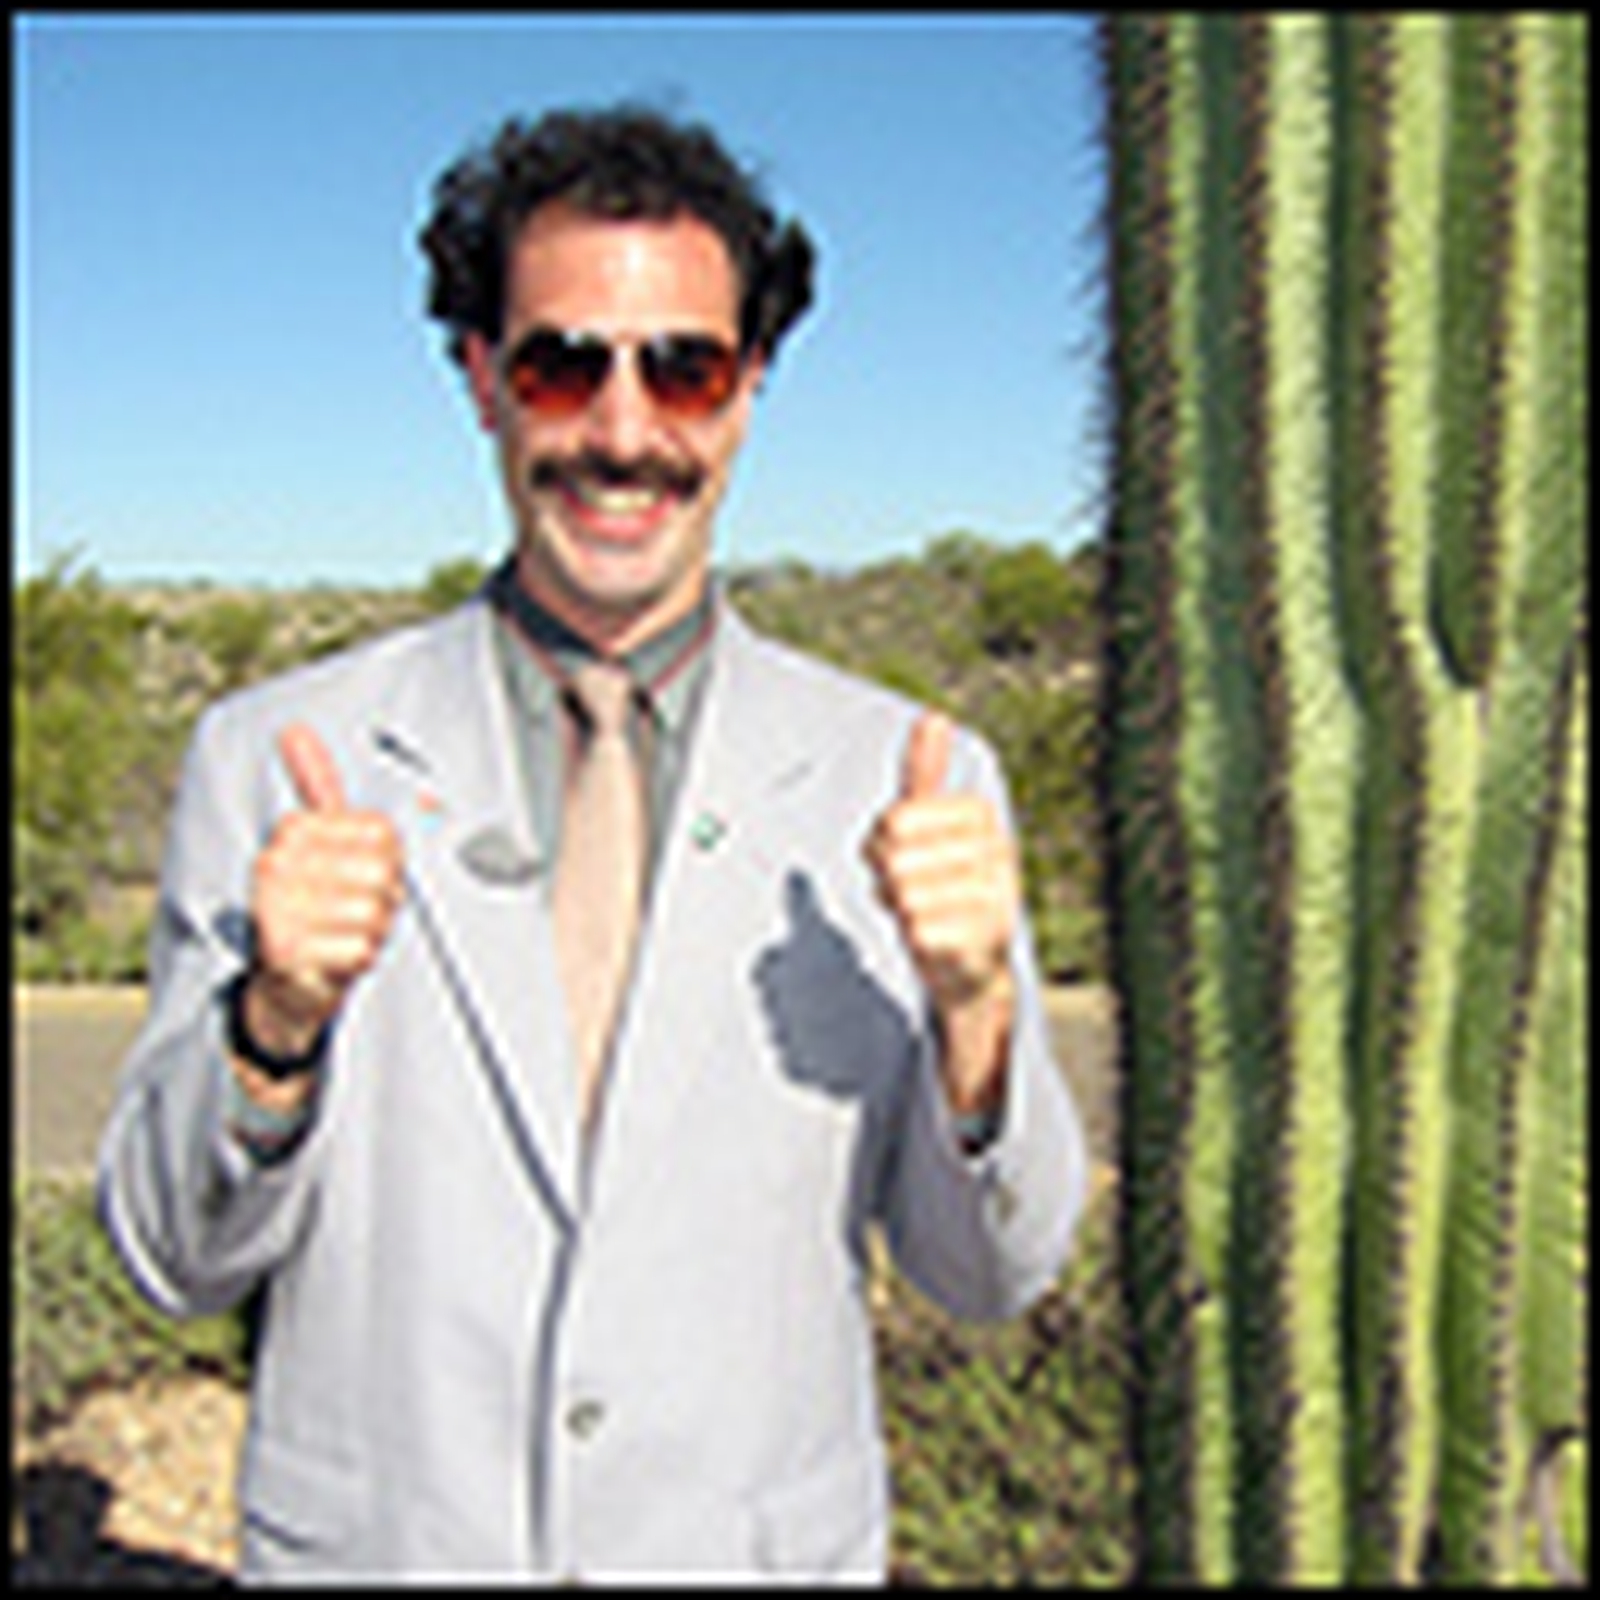 Borat Subsequent Moviefilm 5 Takeaways From the Sequel